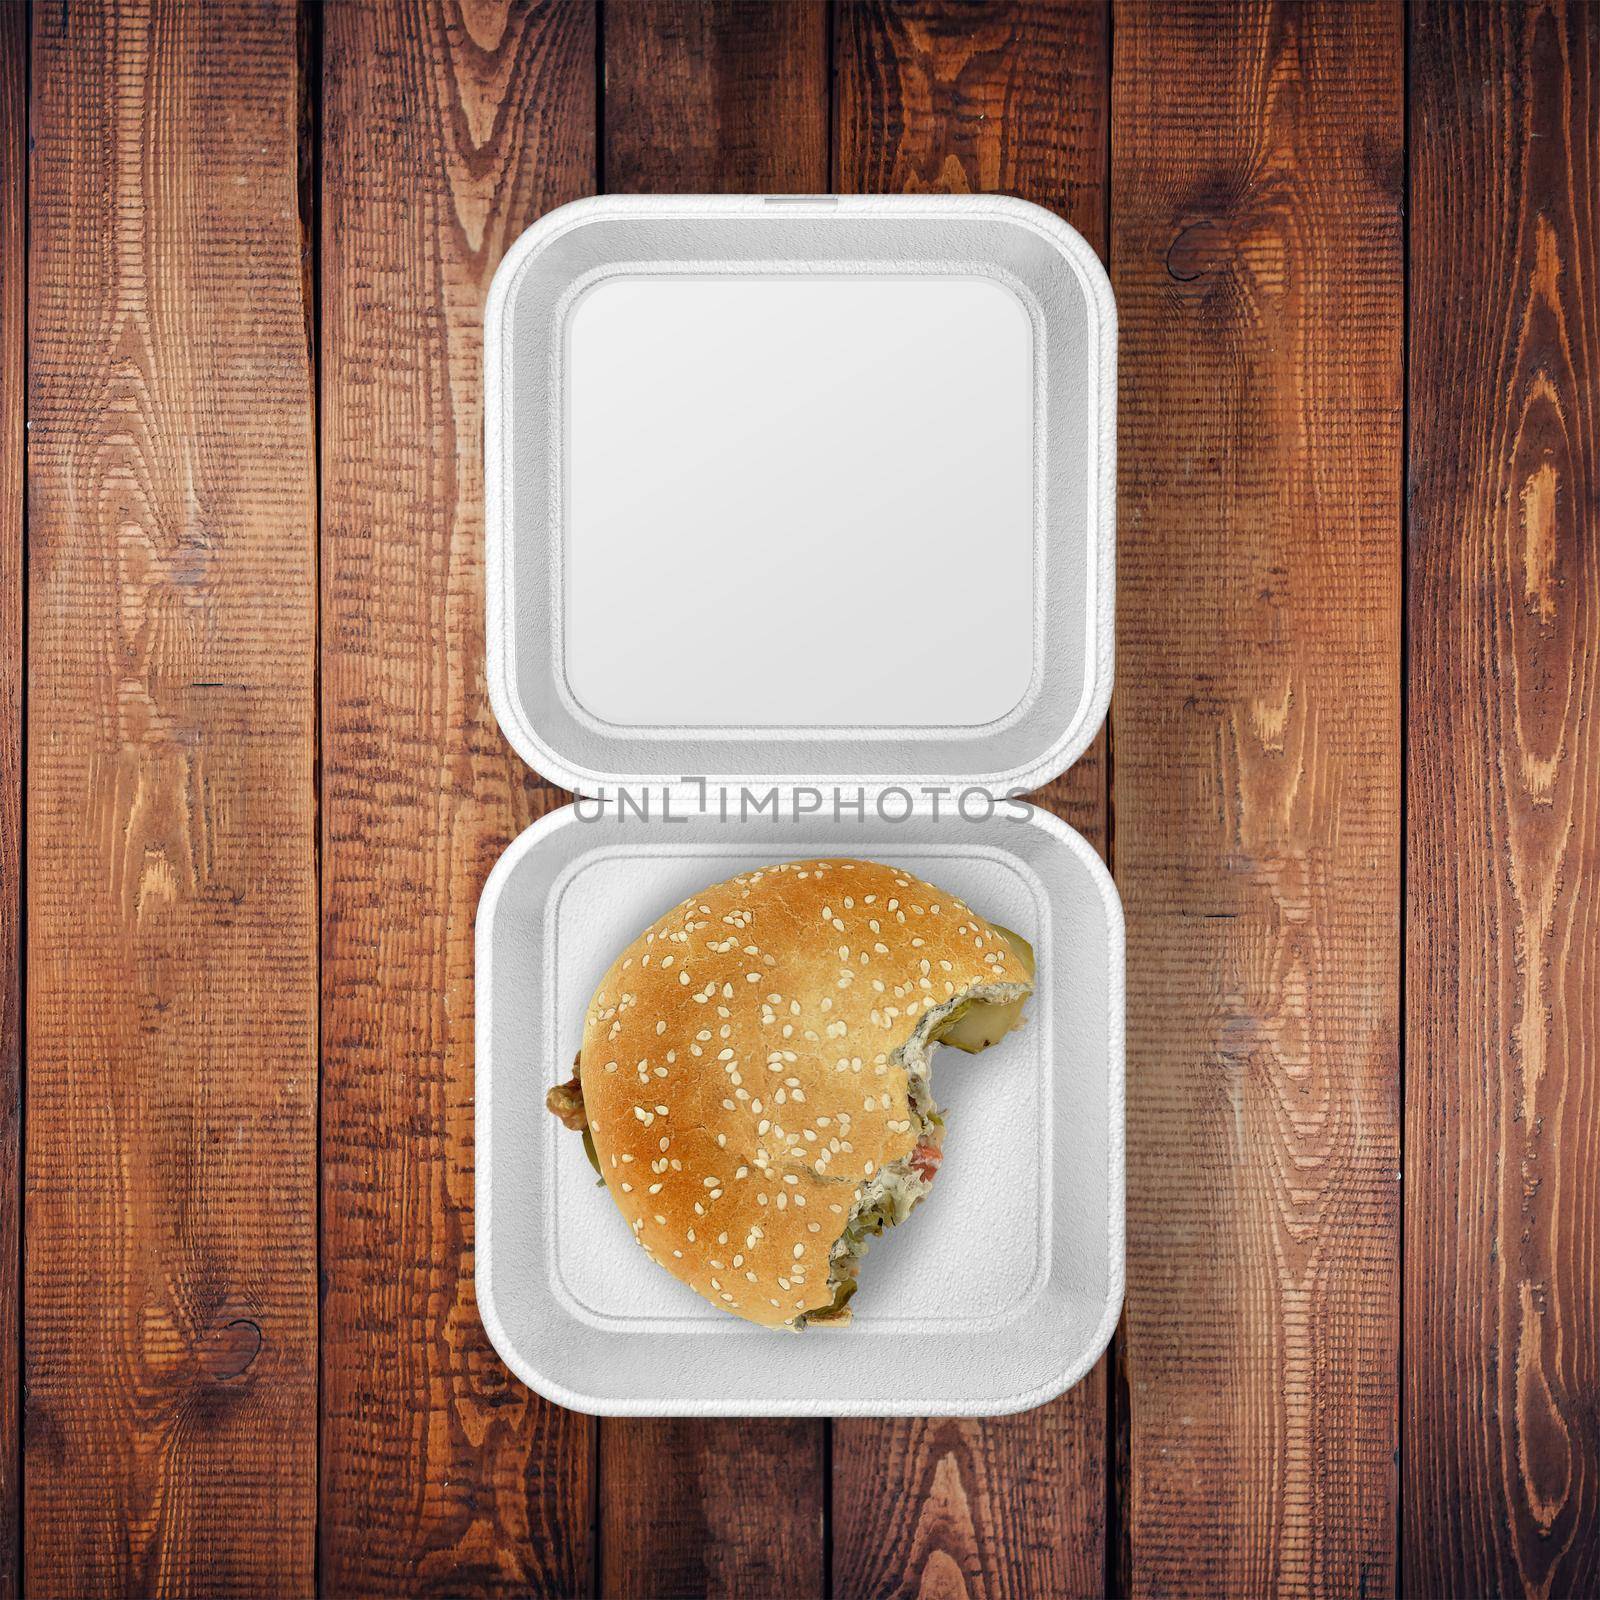 White Food Container Sticker With Burger Bite Mockup On The Wood Table